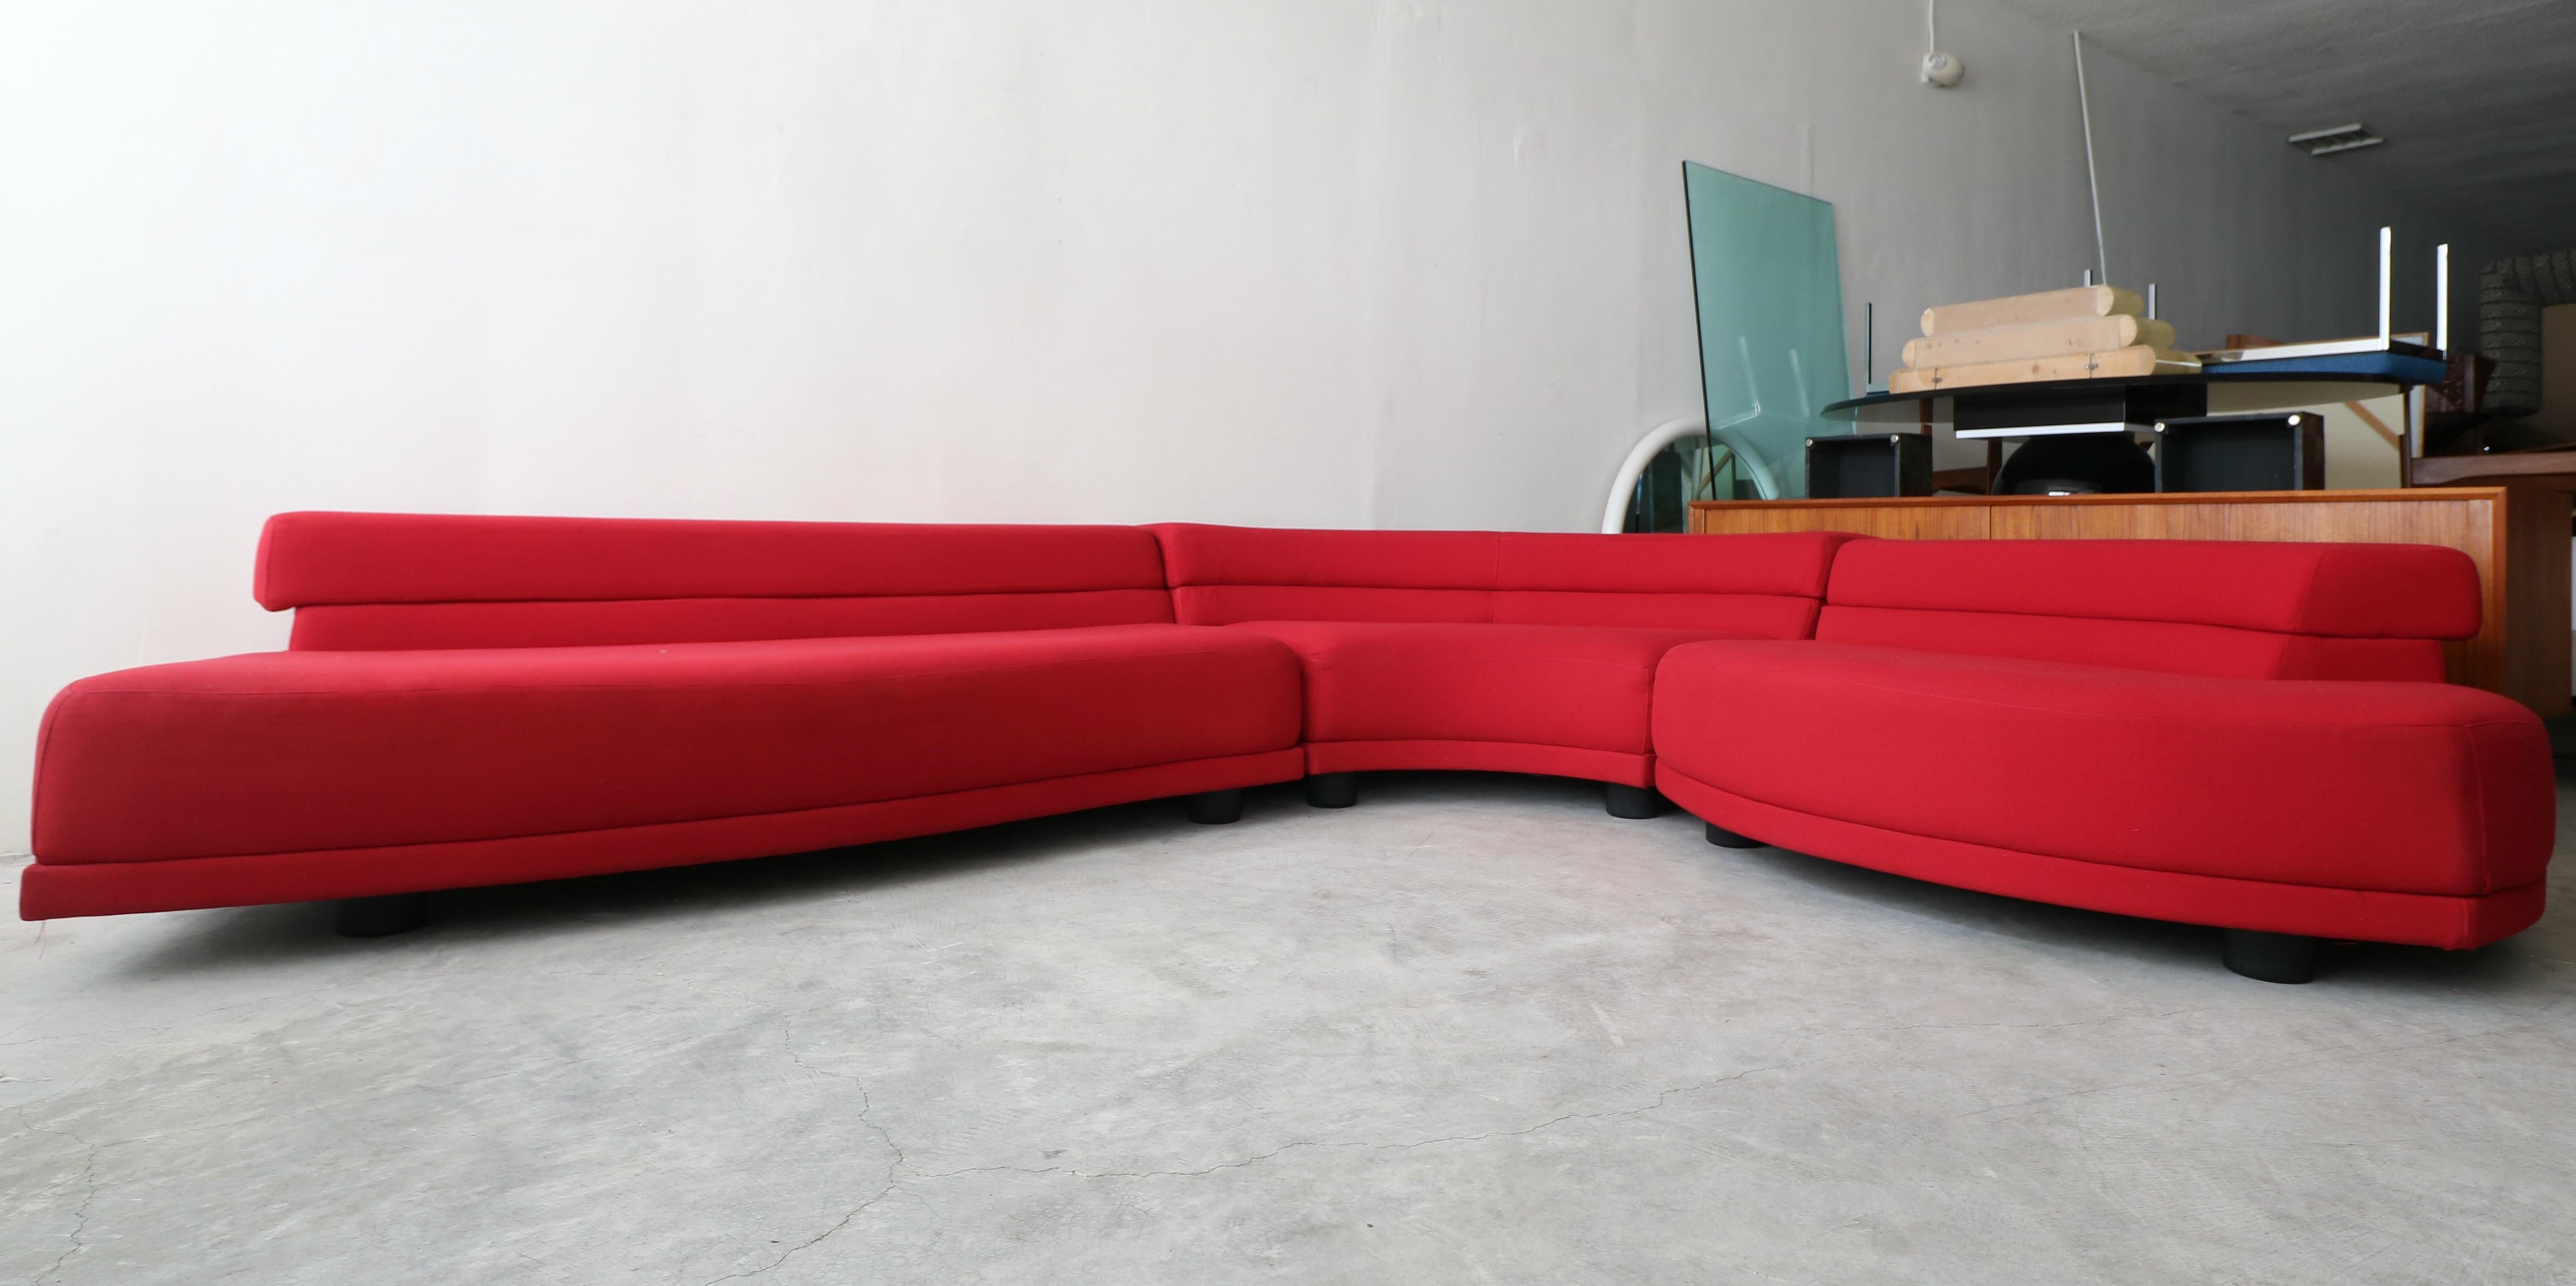 This amazing Postmodern sofa is unlike any sofa I have ever seen. The quality of the construction lends me to think the sofa is Italian or other European in design, however the sofa came out of a prominent local estate that was full of mostly Knoll,